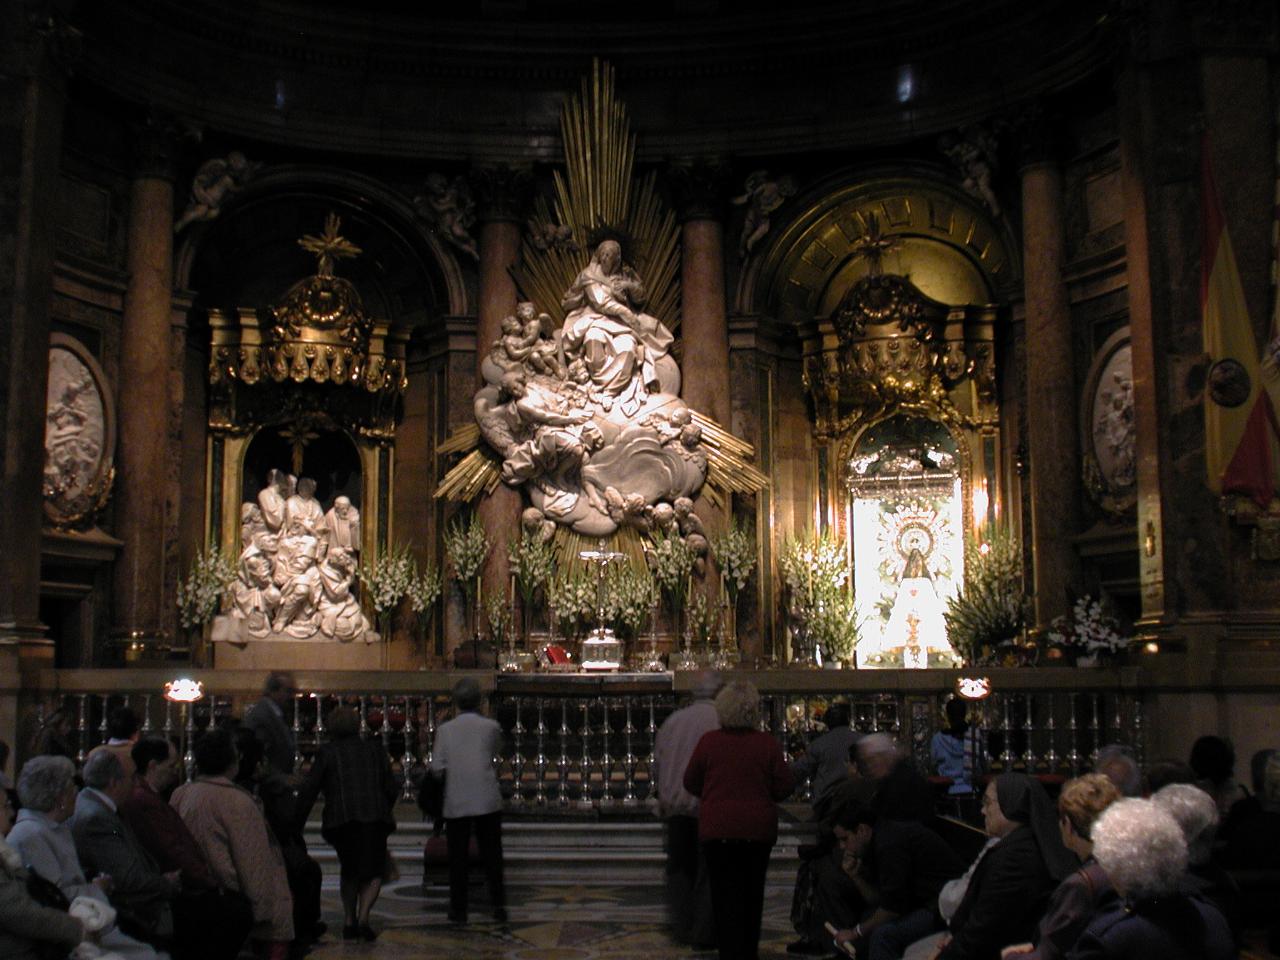 Our Lady of Pilar monument/chapel in Zaragoza